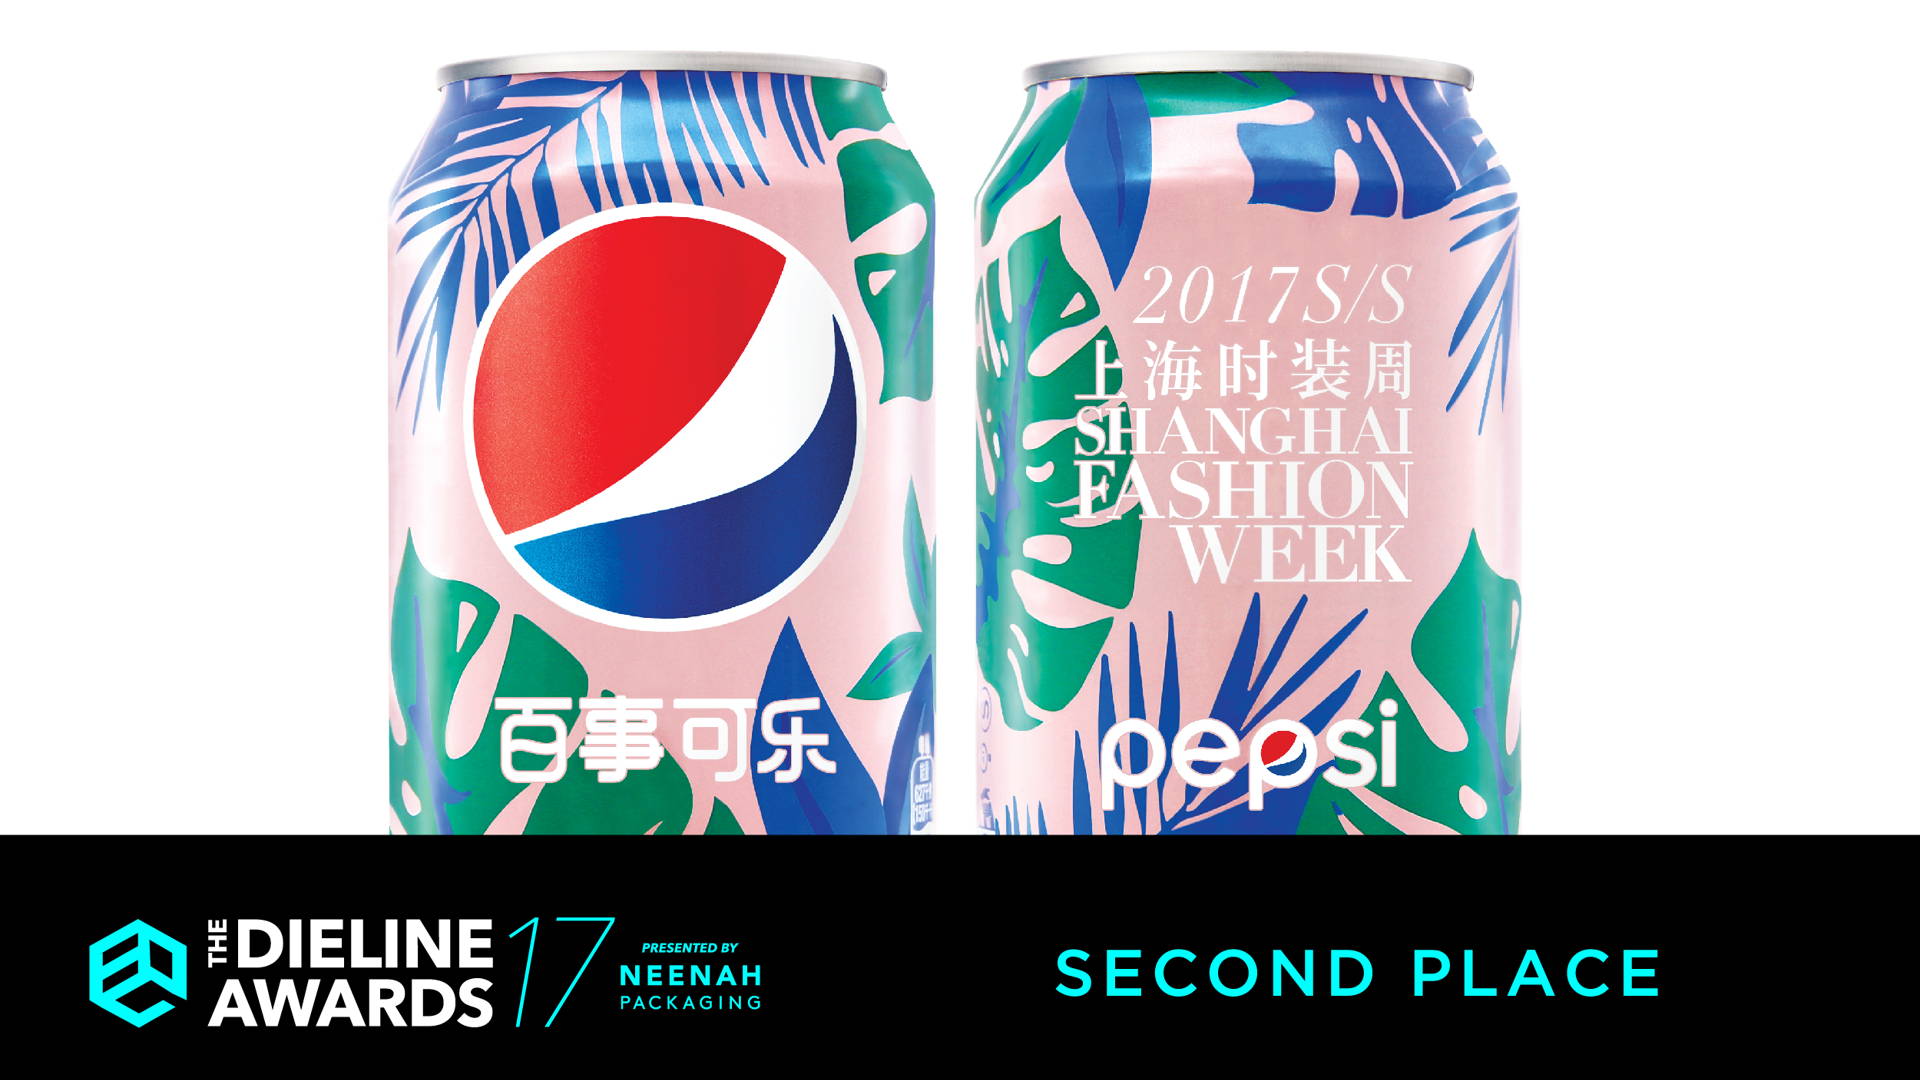 Featured image for The Dieline Awards 2017: Pepsi x Shanghai Fashion Week S/S 2017